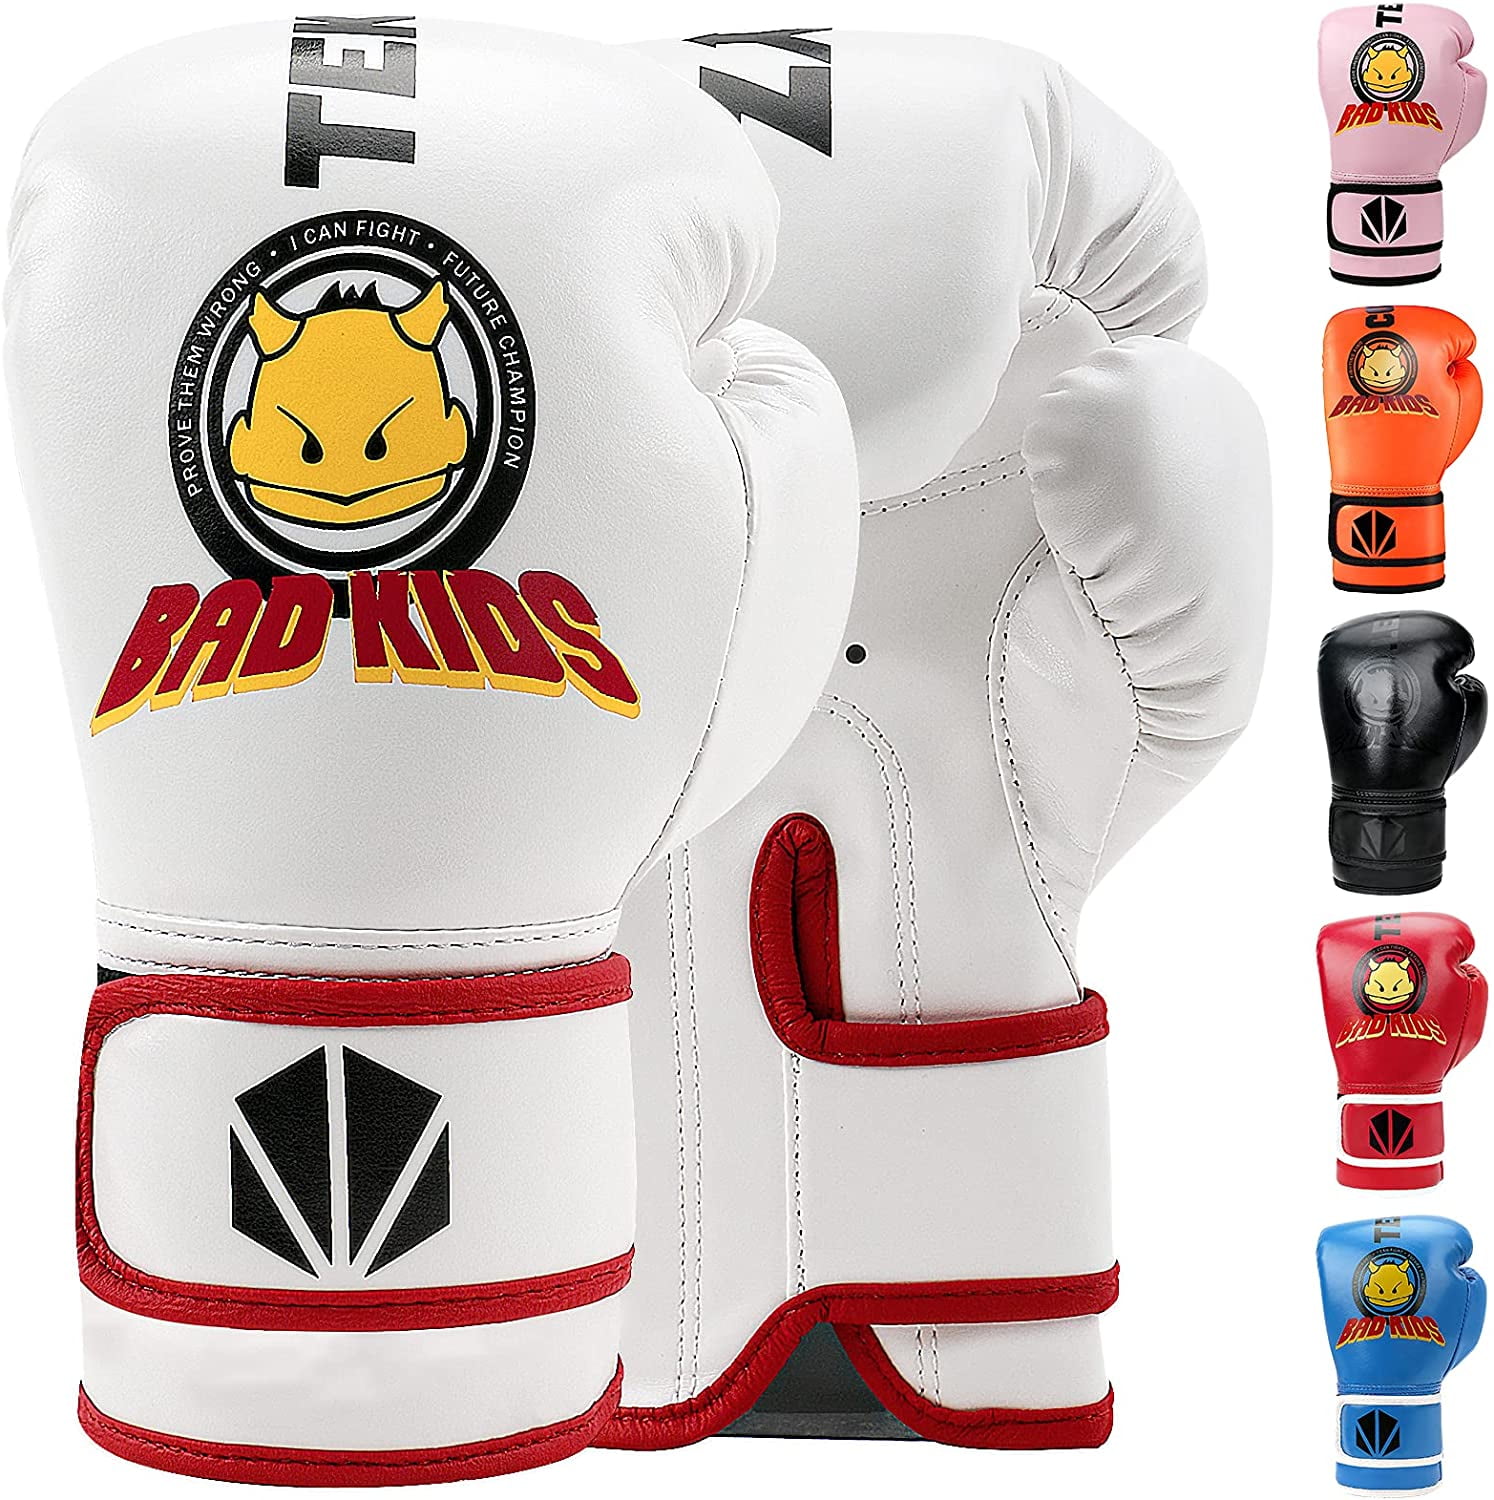 TEKXYZ Bad Kids Series Boxing Gloves 1 Pair Synthetic Leather Kids Boxing Training Gloves with Vivid Color for Boys and Girls Age 3 to 12 Years Old